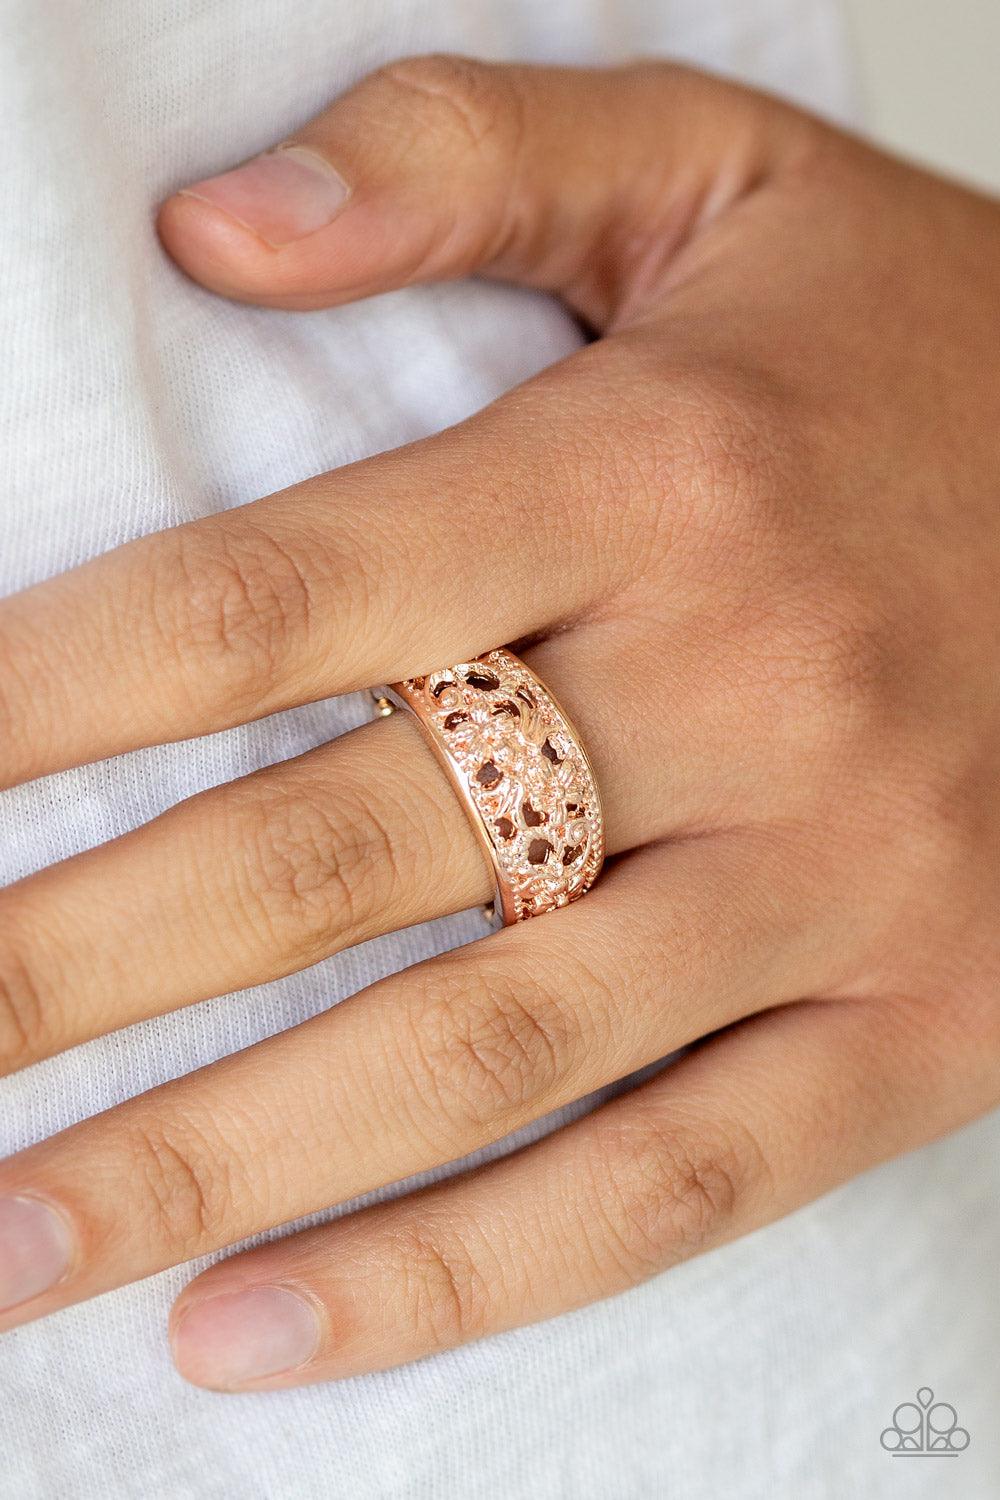 Paparazzi Accessories-Breezy Blossoms - Rose Gold Ring - jewelrybybretta